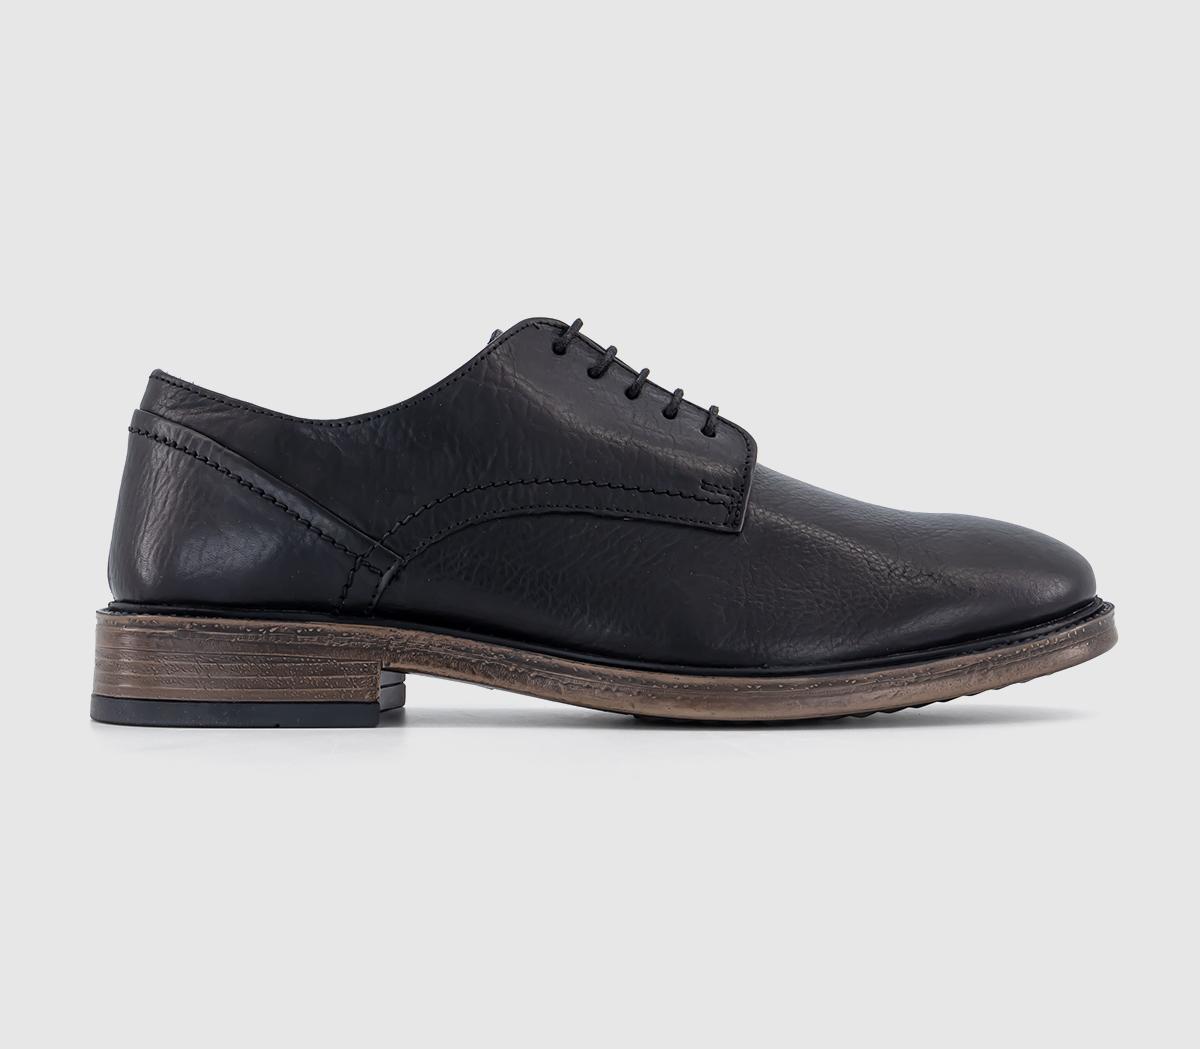 OFFICECadeleigh Casual Leather Derby ShoesBlack Leather